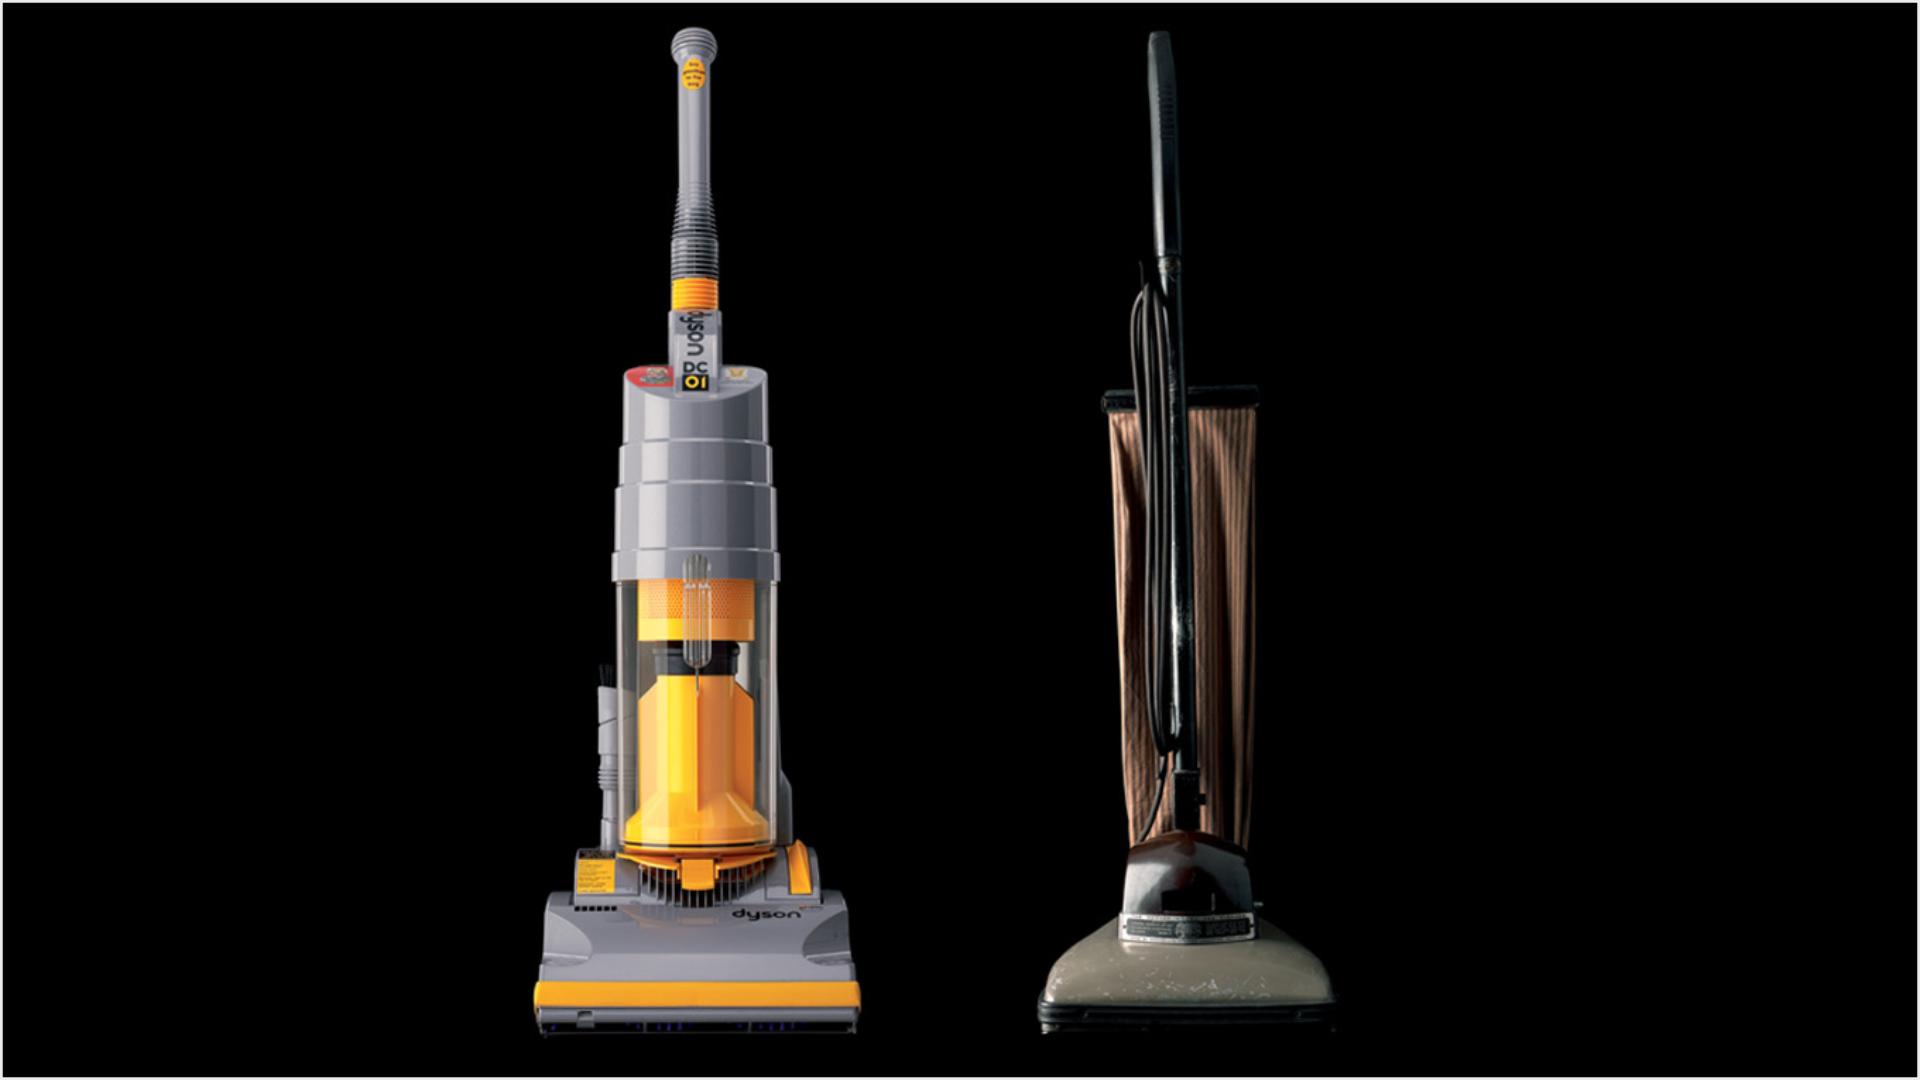 Dyson upright vacuum next to a vacuum using a bag.